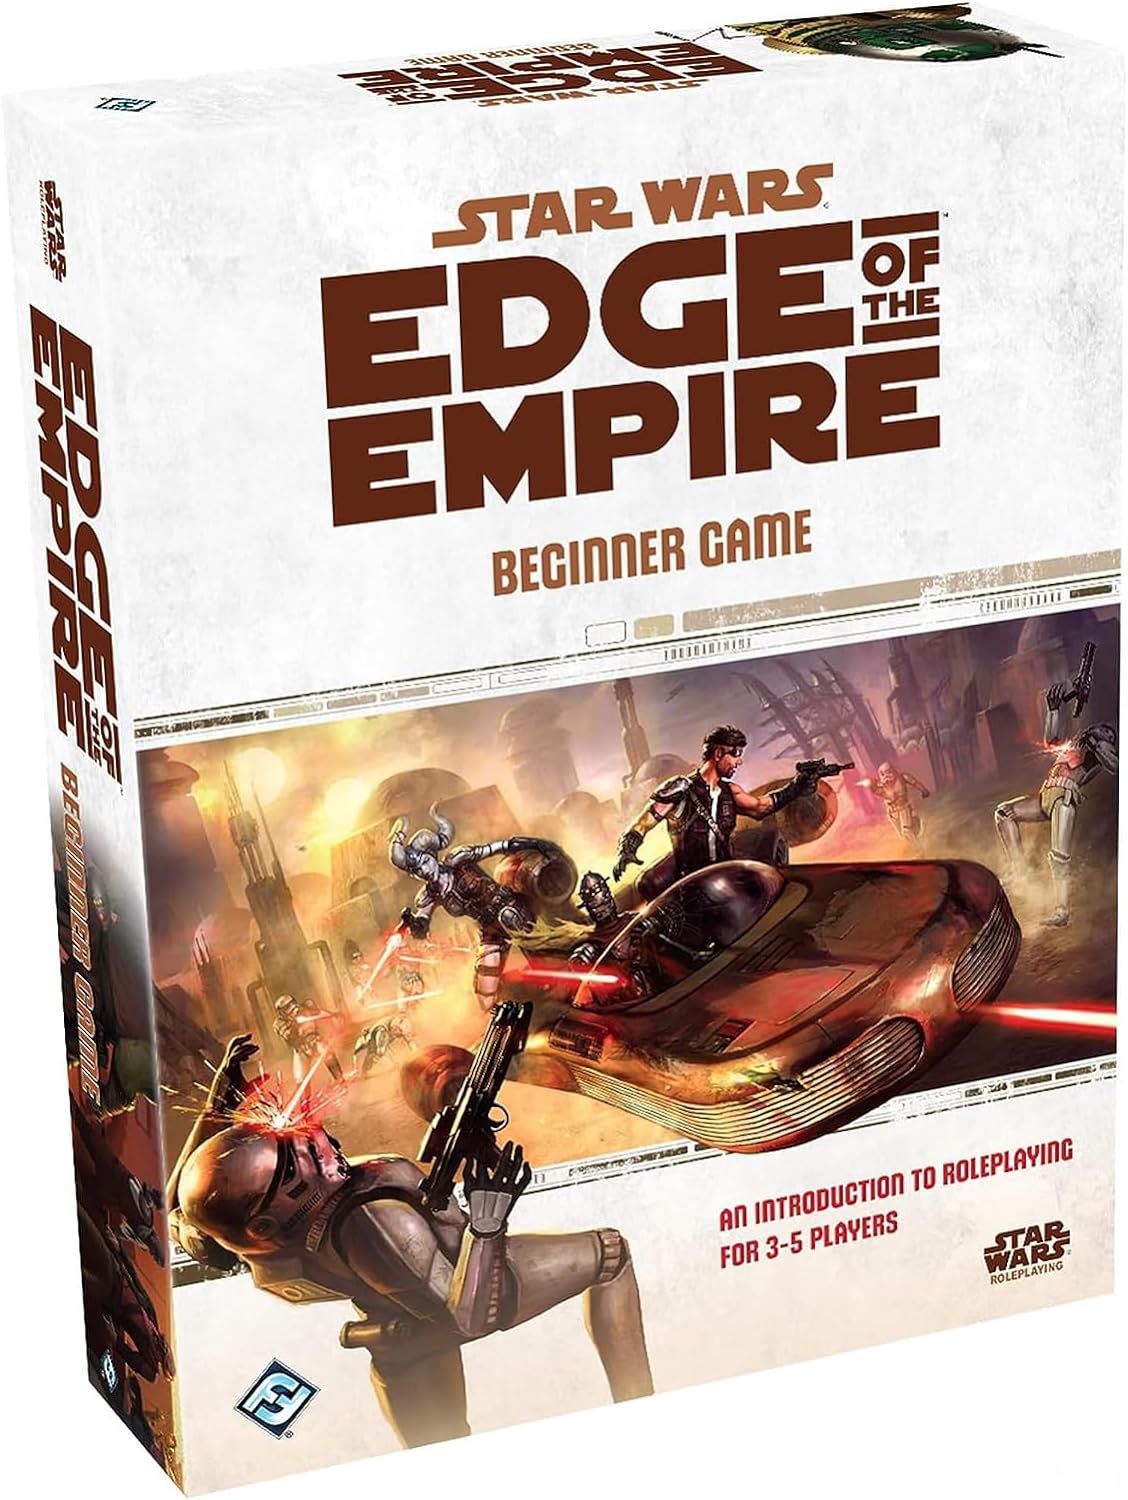 The cover of Edge of the Empire shows a number of villains taking out stormtroopers along the way in a speeder.